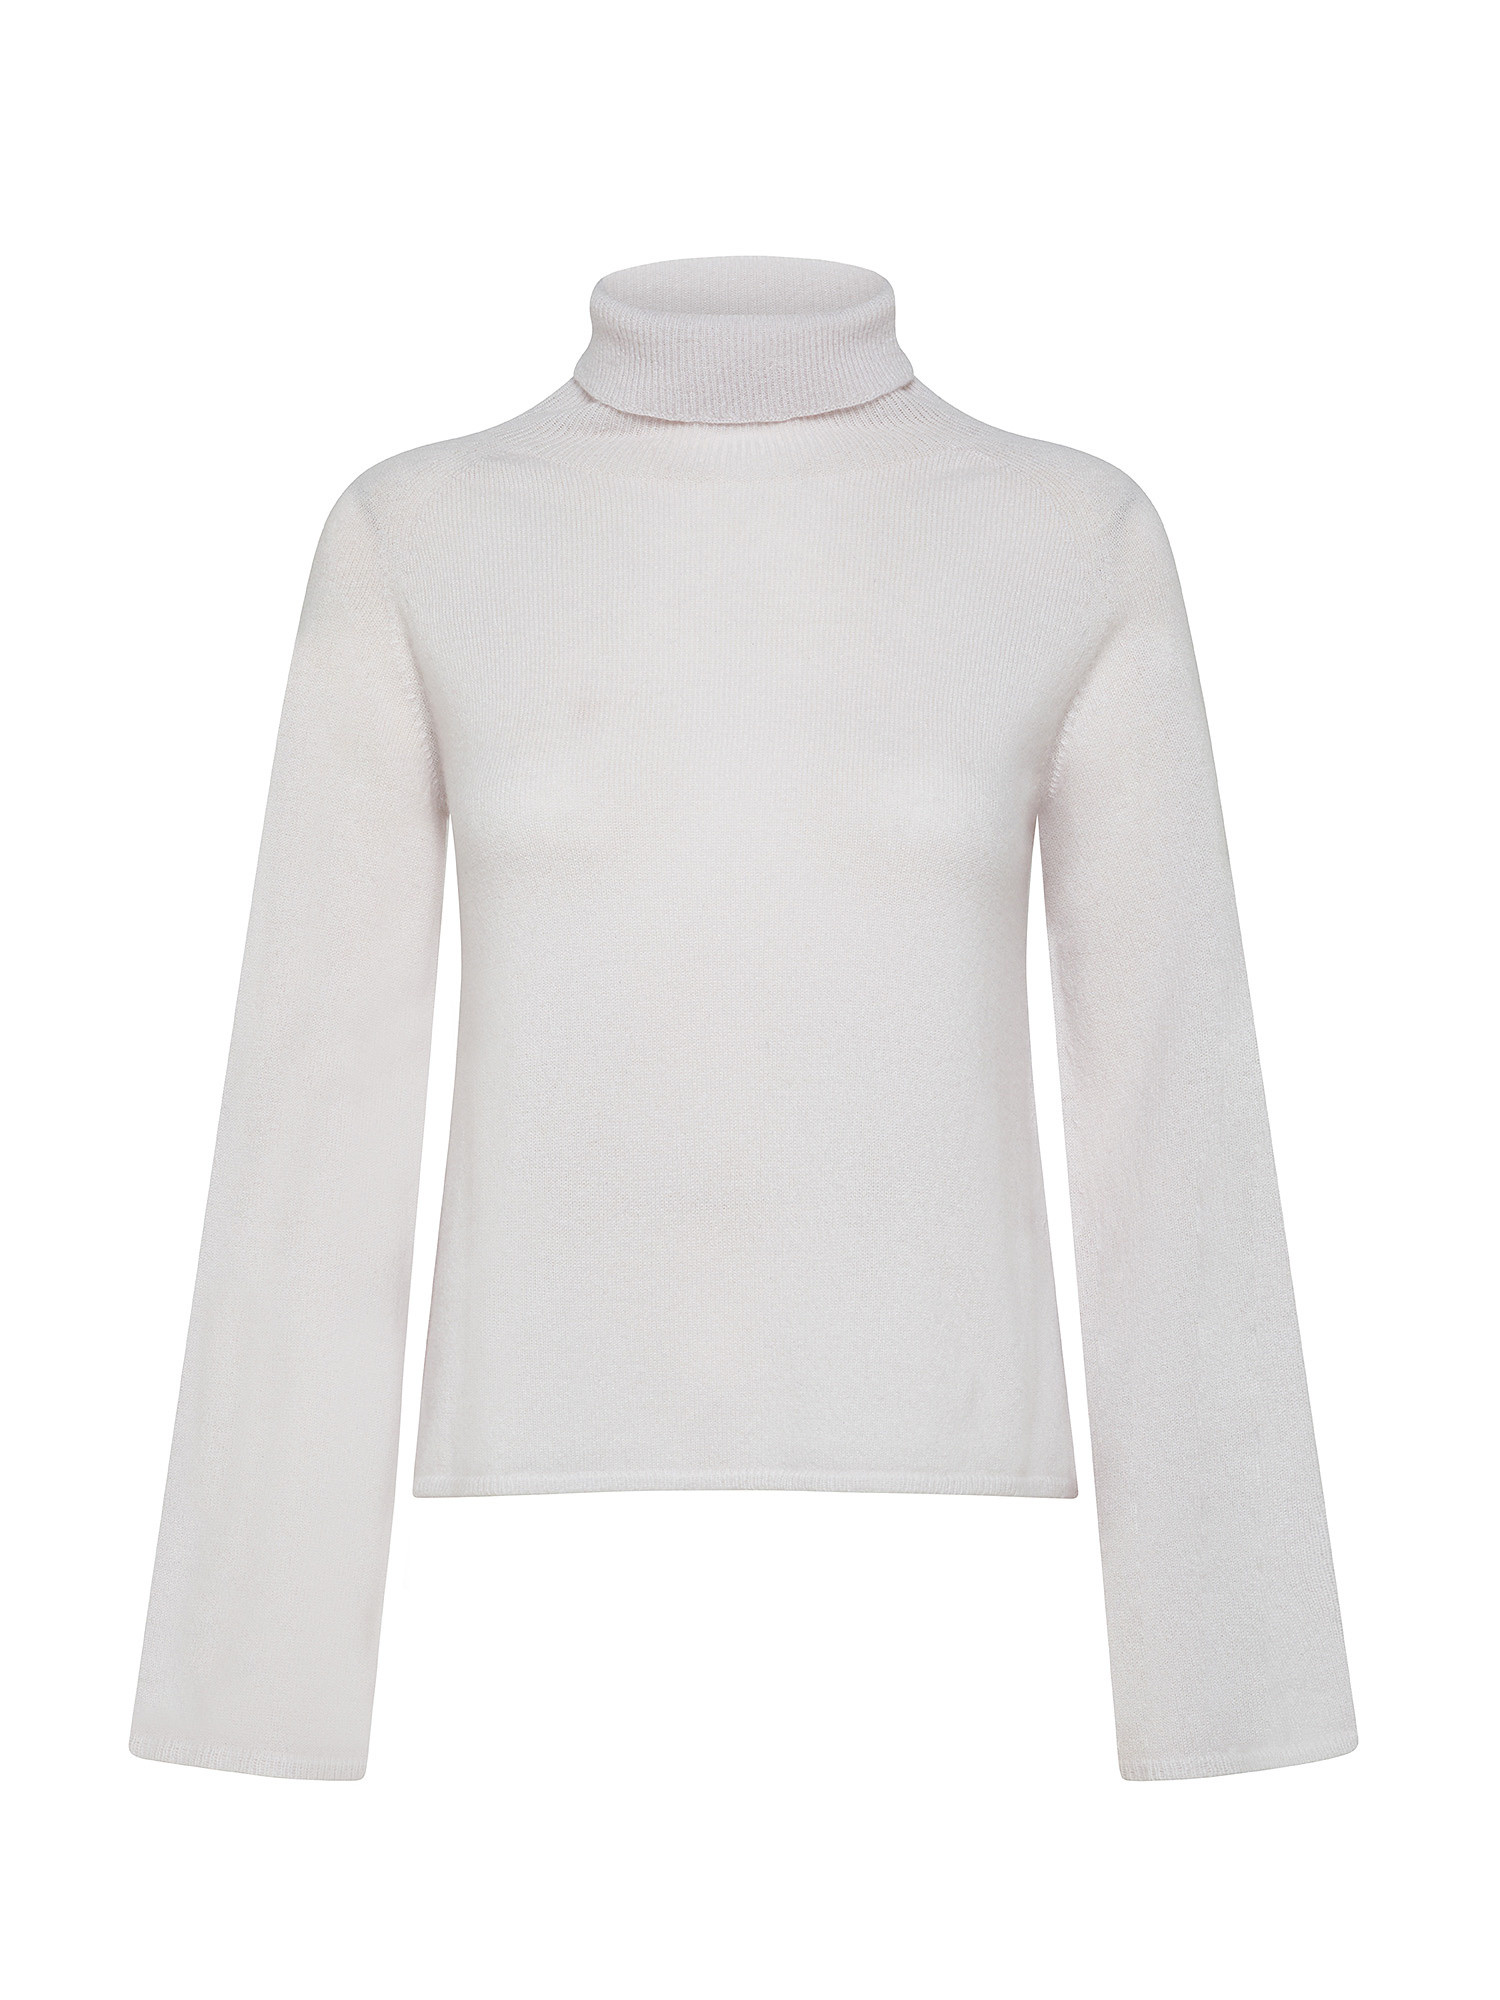 Coin Cashmere - Dolcevita in puro cashmere premium, Bianco, large image number 0